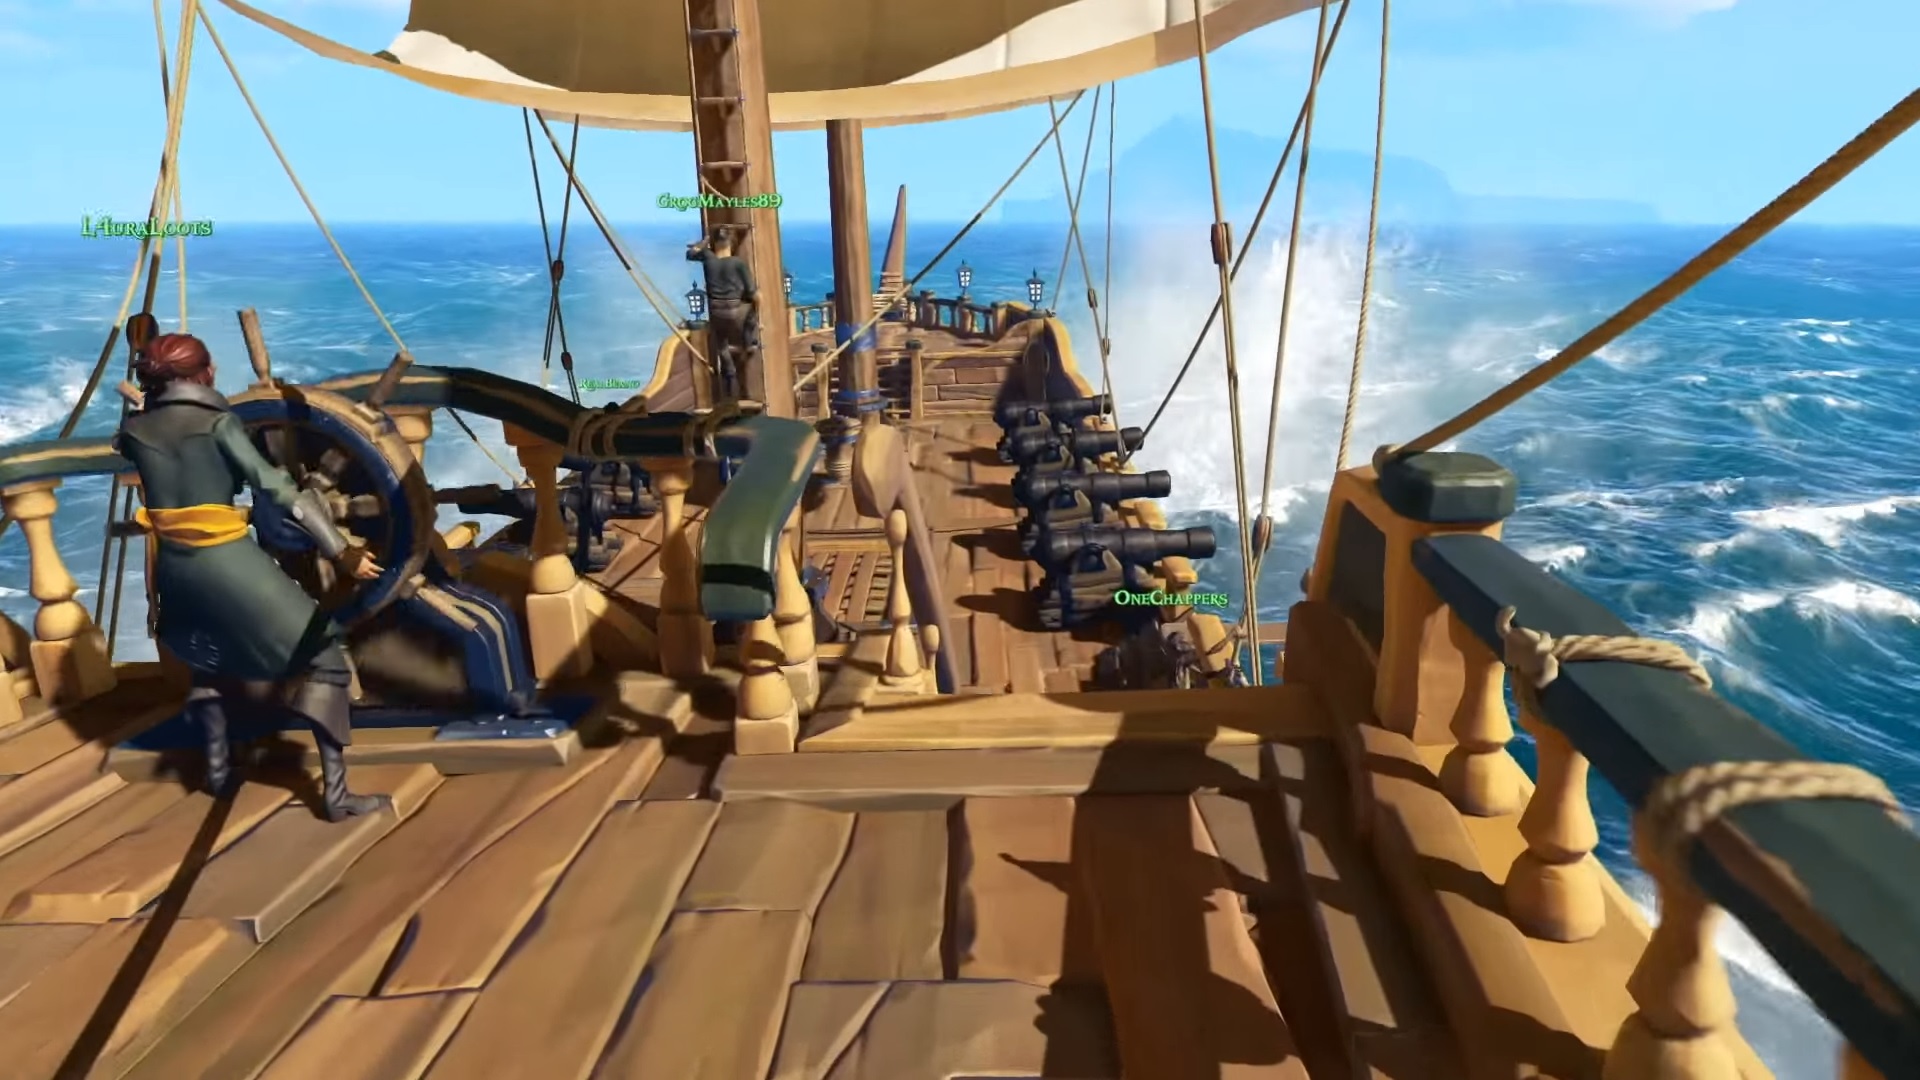 Kræft Stort univers vest Rare offering fans the chance to play Sea of Thieves early through contest  - GAMING TREND